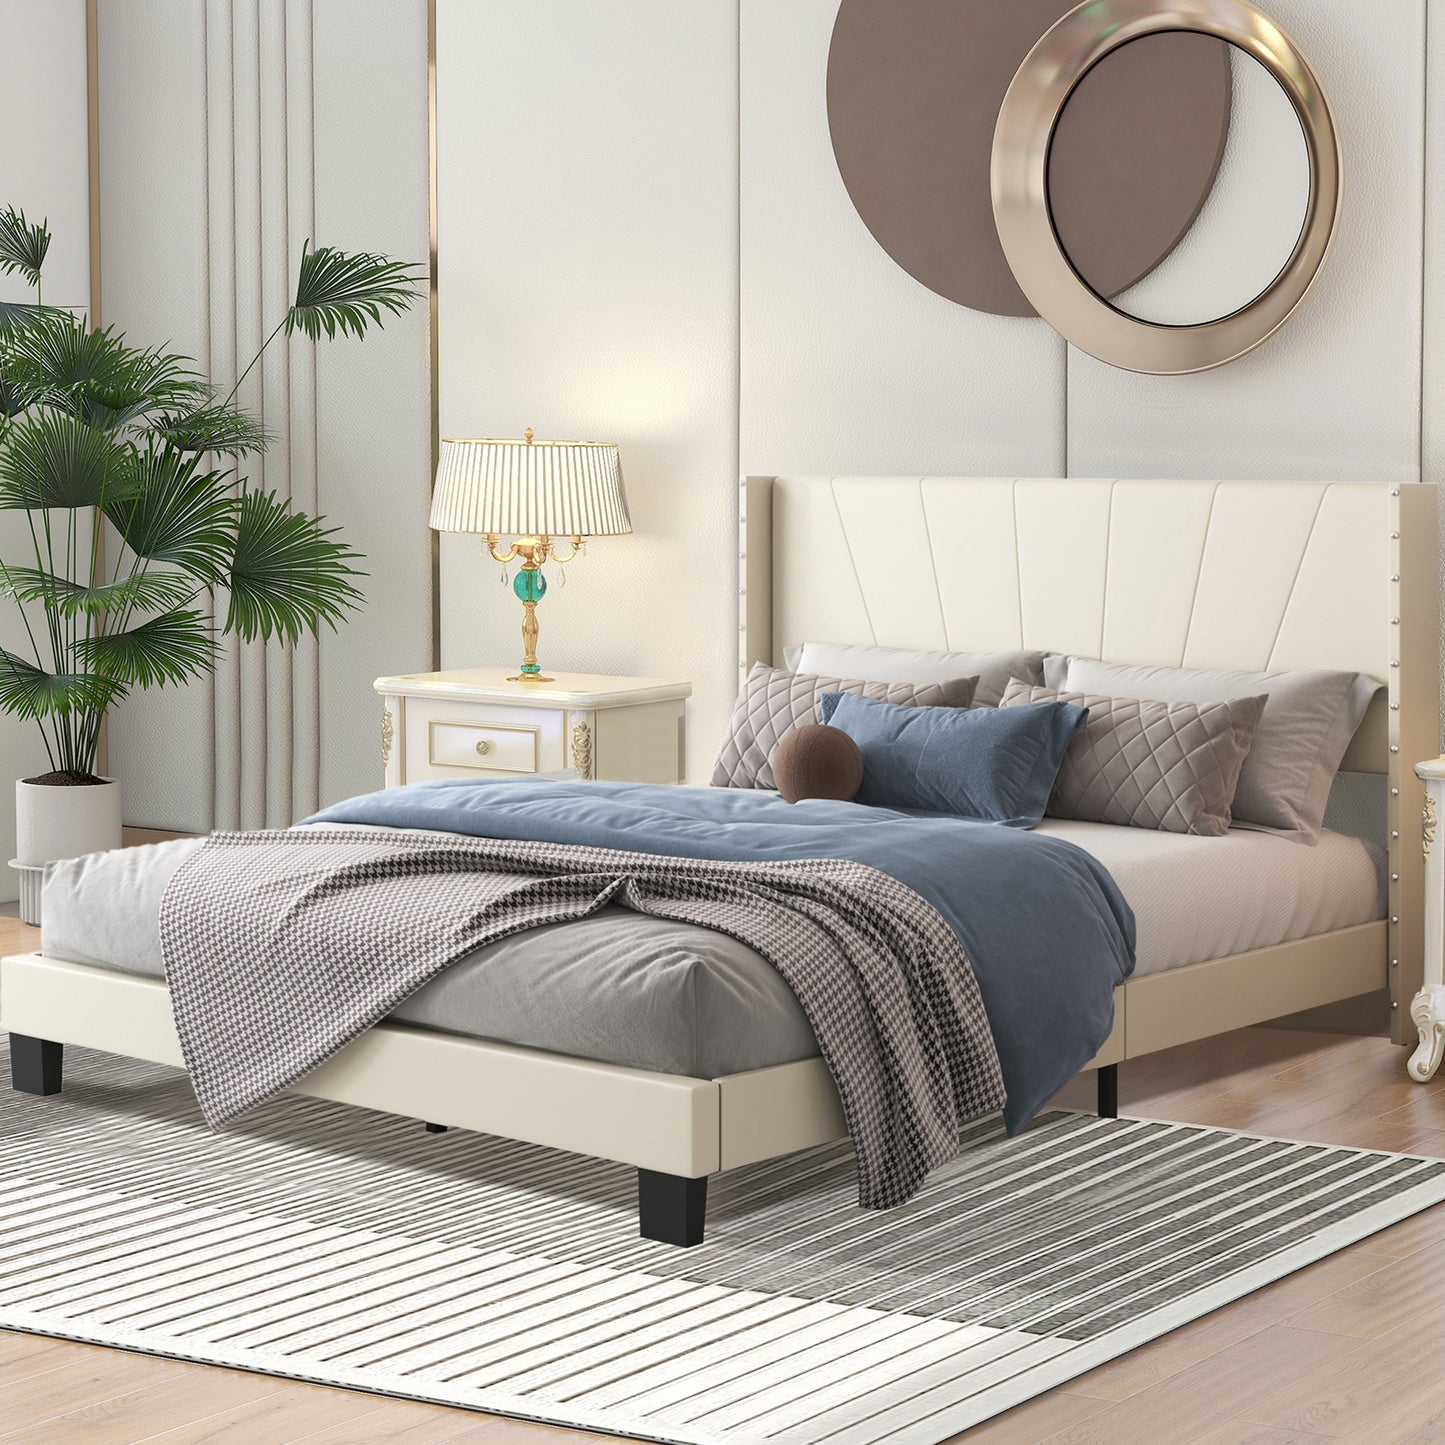 SYNGAR Upholstered Queen Bed Frame with Nailhead Trim Headboard, Fabric Platform Bed Frame Queen Size Bed Frame, Bedroom Furniture for Teens Adults, No Box Spring Needed, Gray